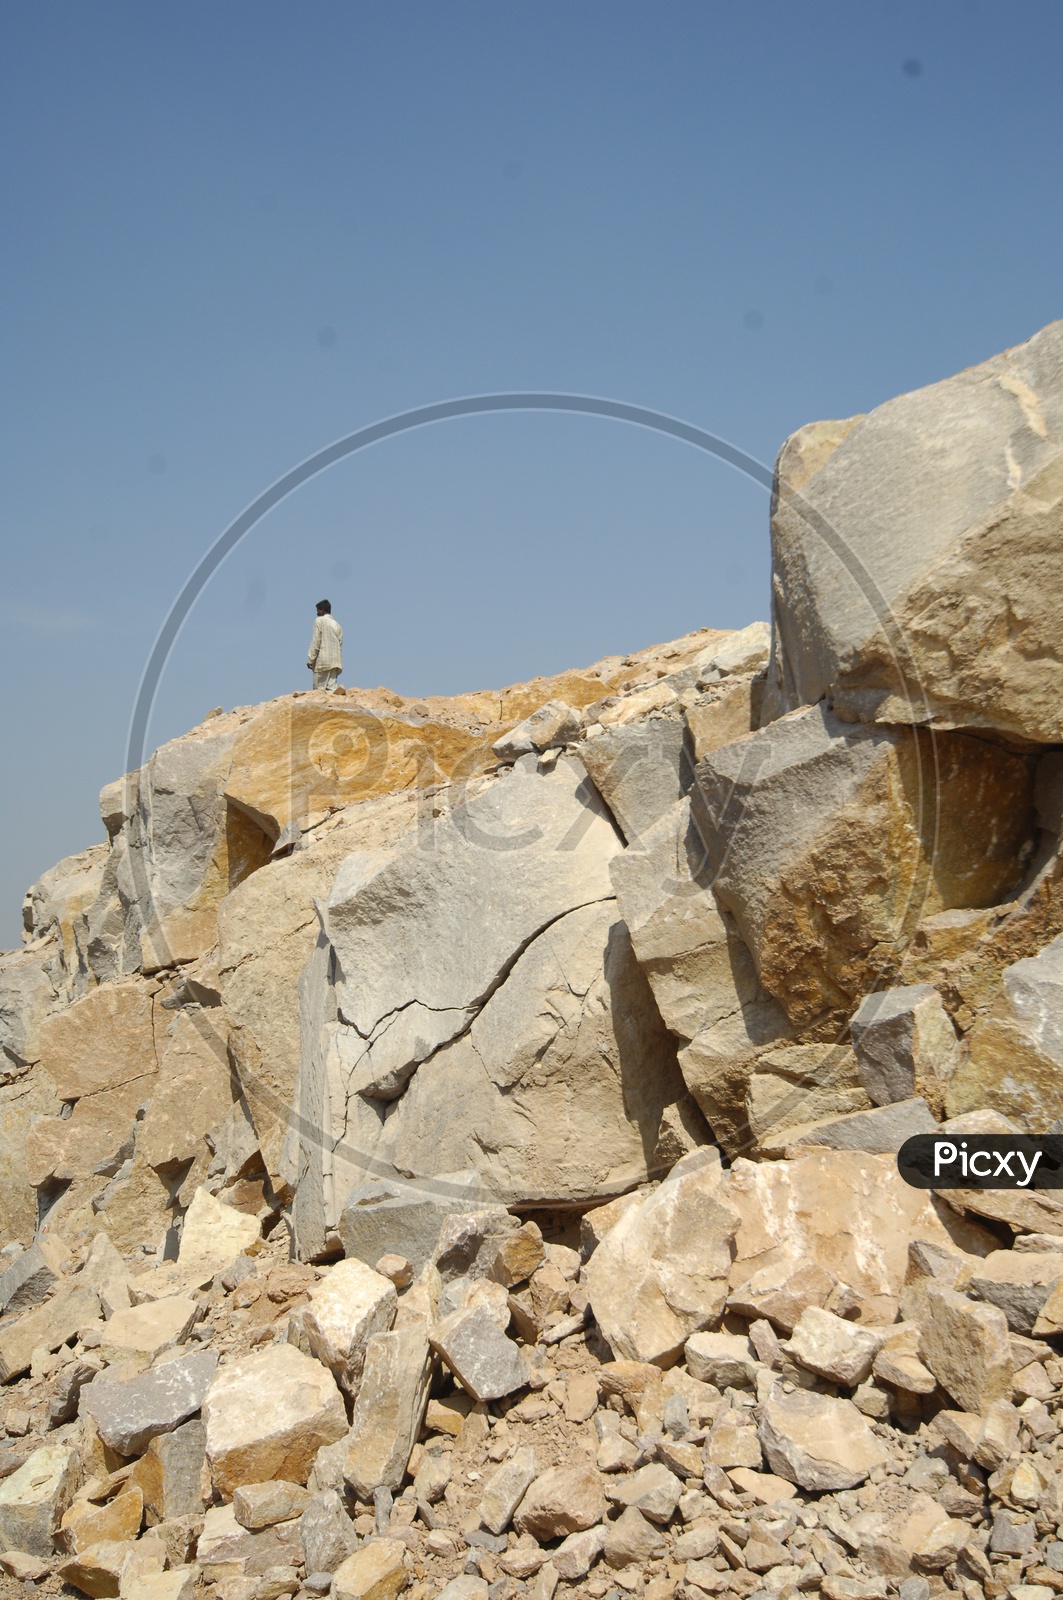 Man standing on top of the Granite boulder quarry